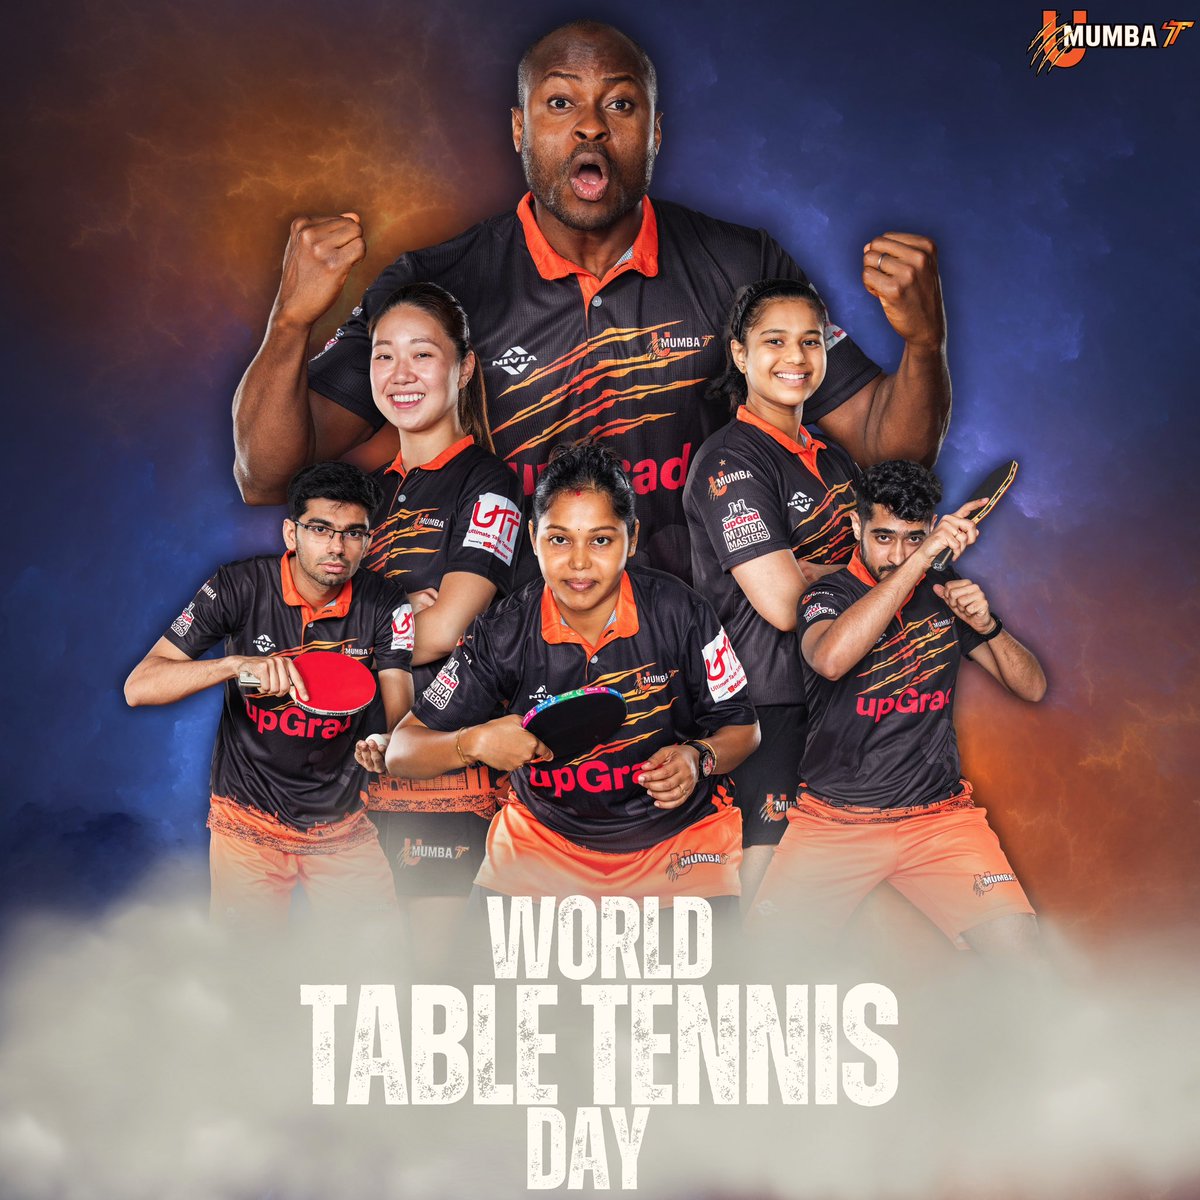 Join us in honoring our incredible table tennis athletes on today’s World Table Tennis Day.🏓🧡 #UMumba | #UMumbaTT @suhailchandhok | @RonnieScrewvala | @UltTableTennis | @Vitadani11